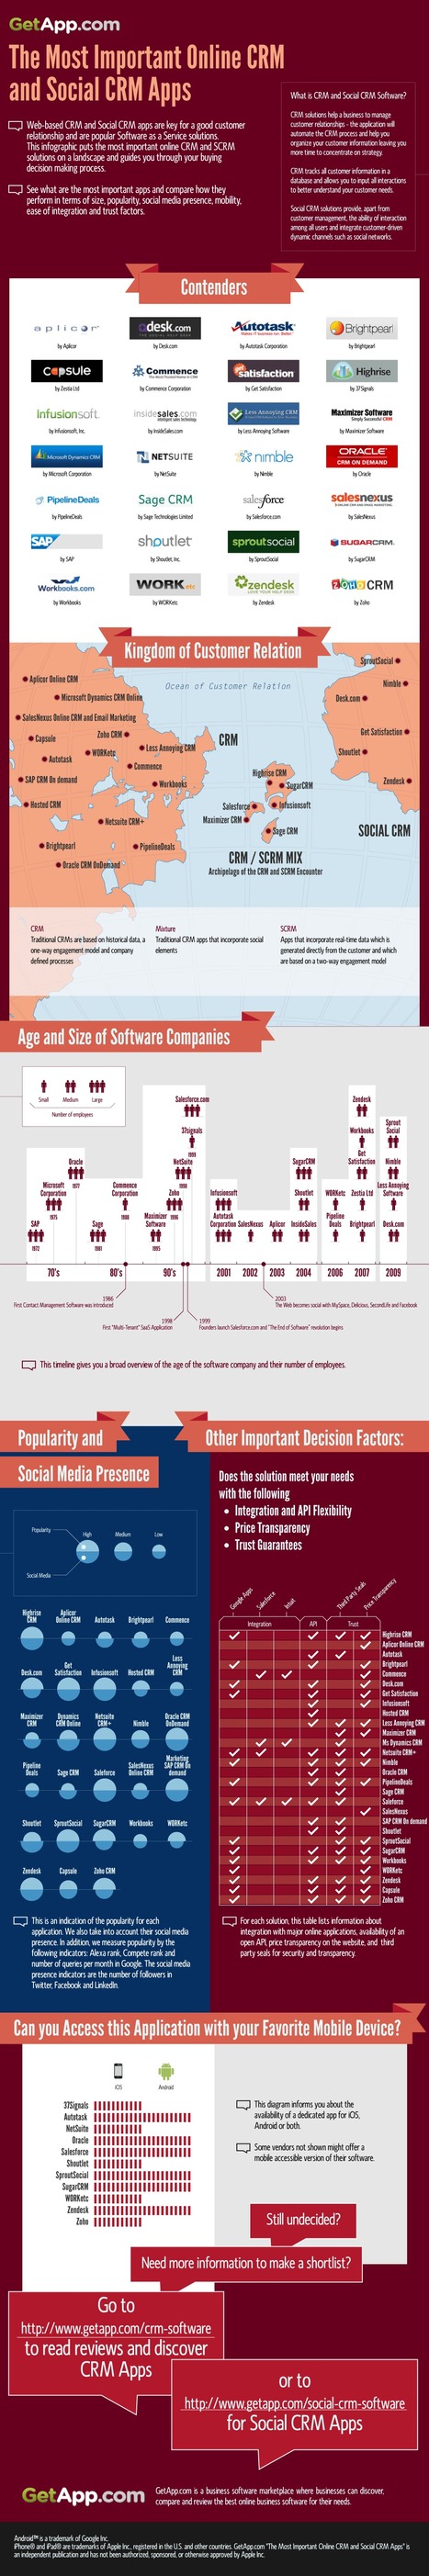 Does Social Customer Relationship Management (CRM) Exist? Maybe [Infographic] | Latest Social Media News | Scoop.it